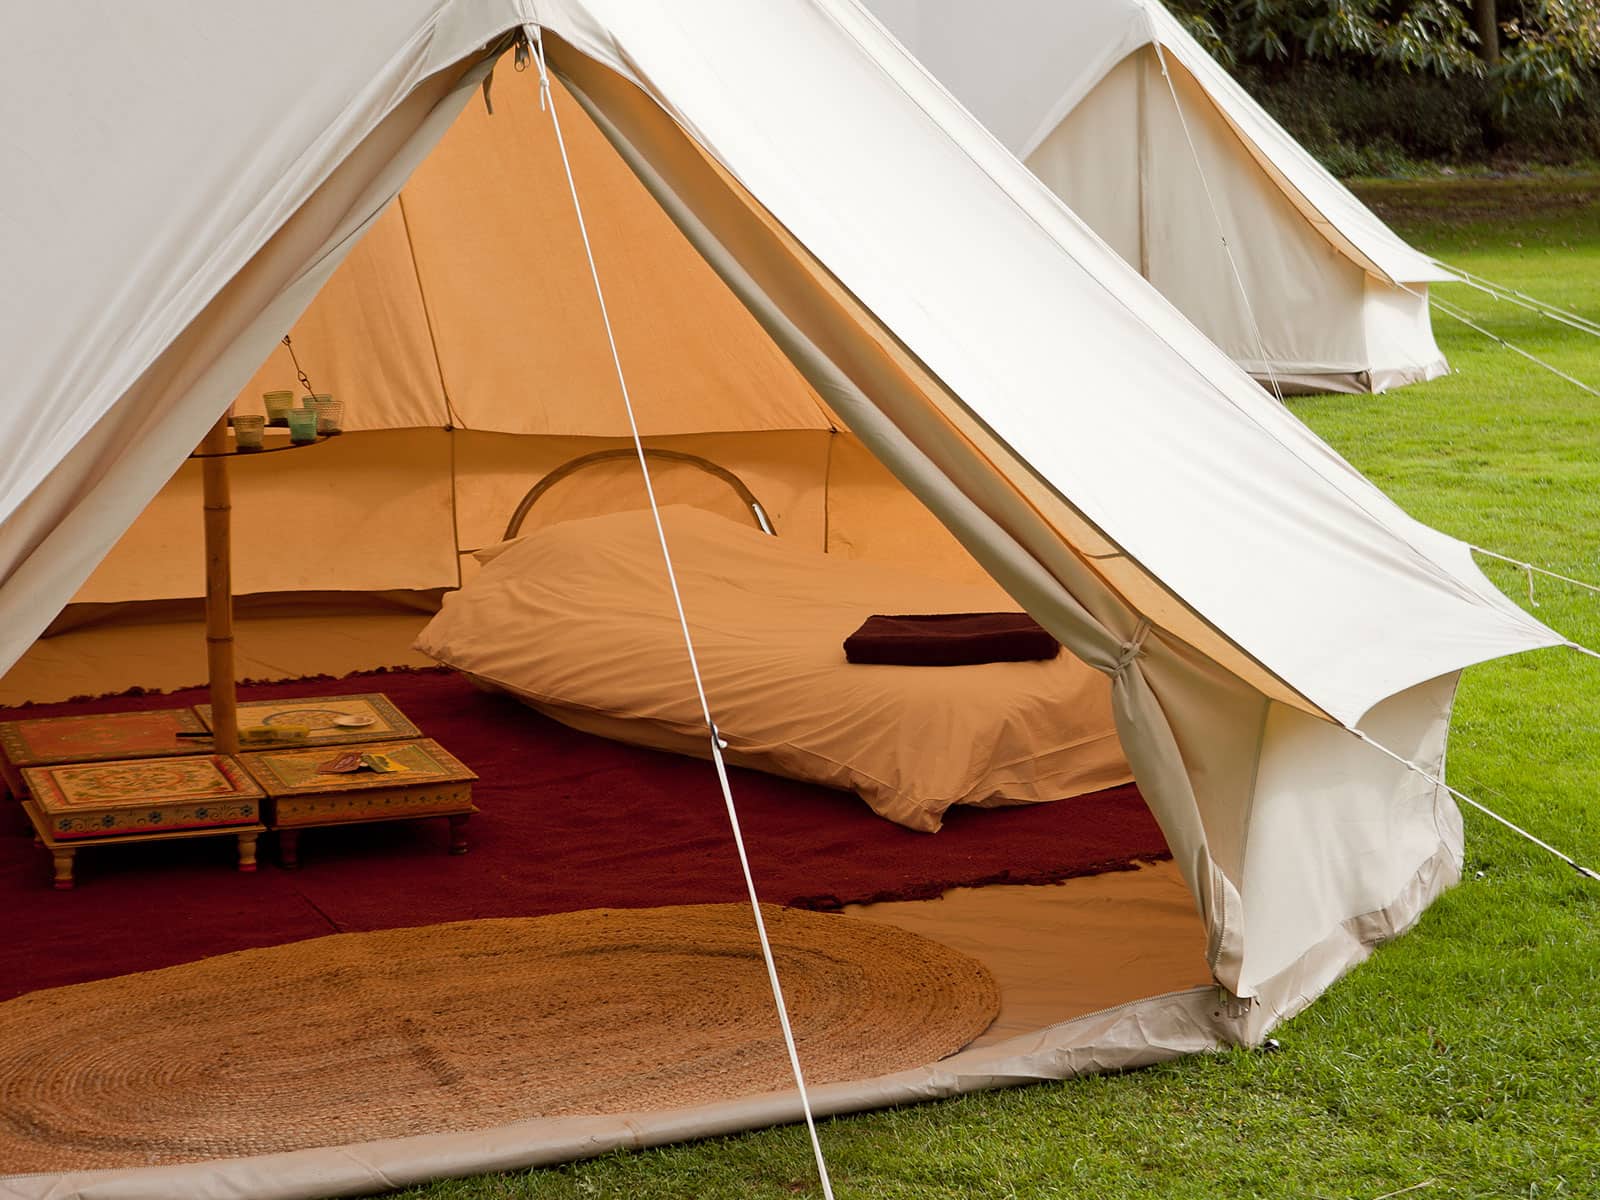 5m deluxe bell tent features a sewn-in bath tub ground sheet